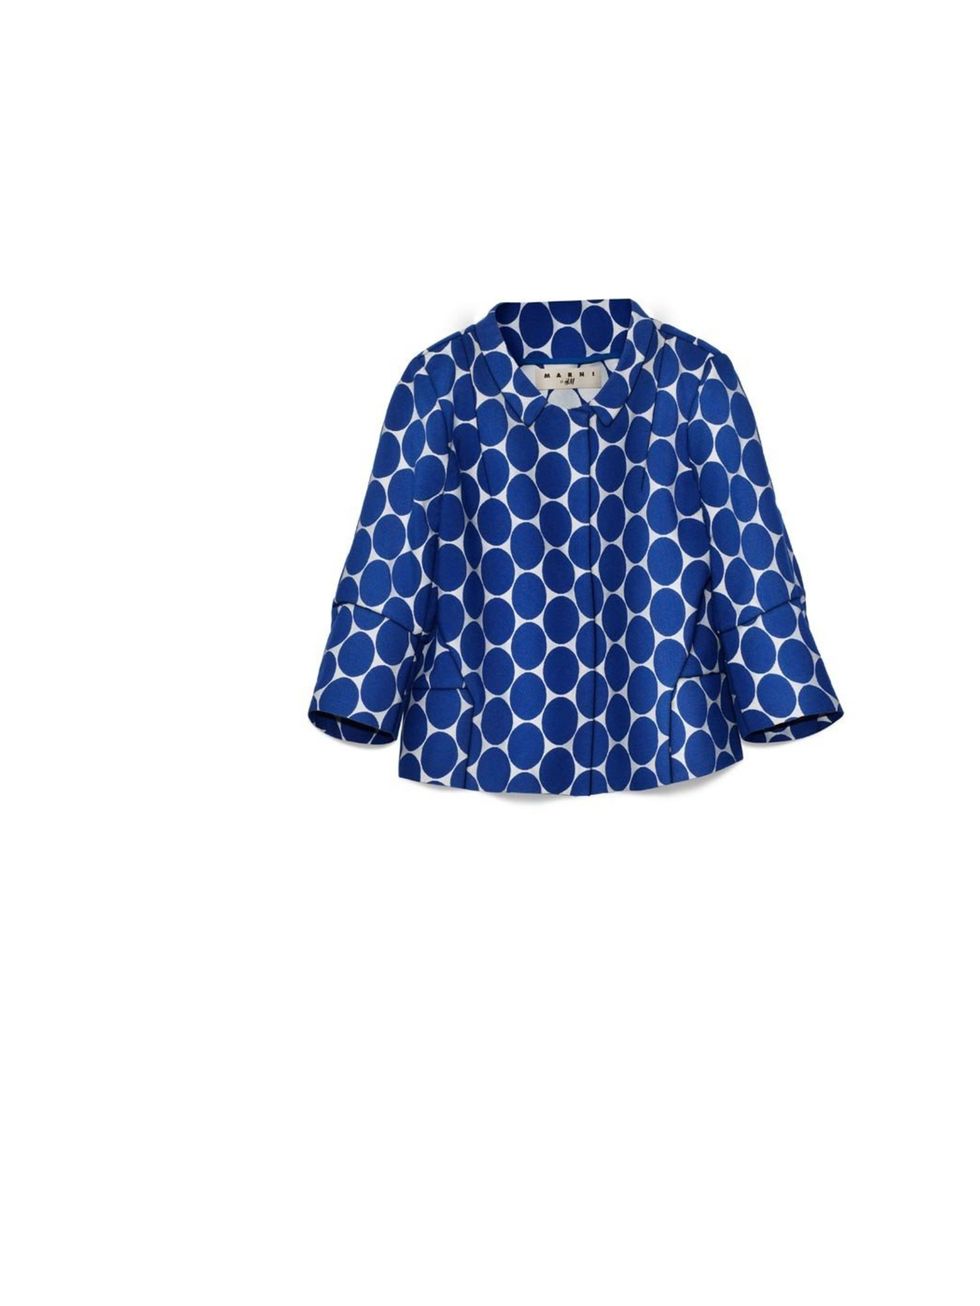 <p><a href="http://www.elleuk.com/fashion/news/sofia-coppola-takes-marni-for-h-m-to-marrakech">Marni for H&amp;M</a> silk jacket, £69.99, available at <a href="http://www.hm.com/gb/">H&amp;M</a></p>